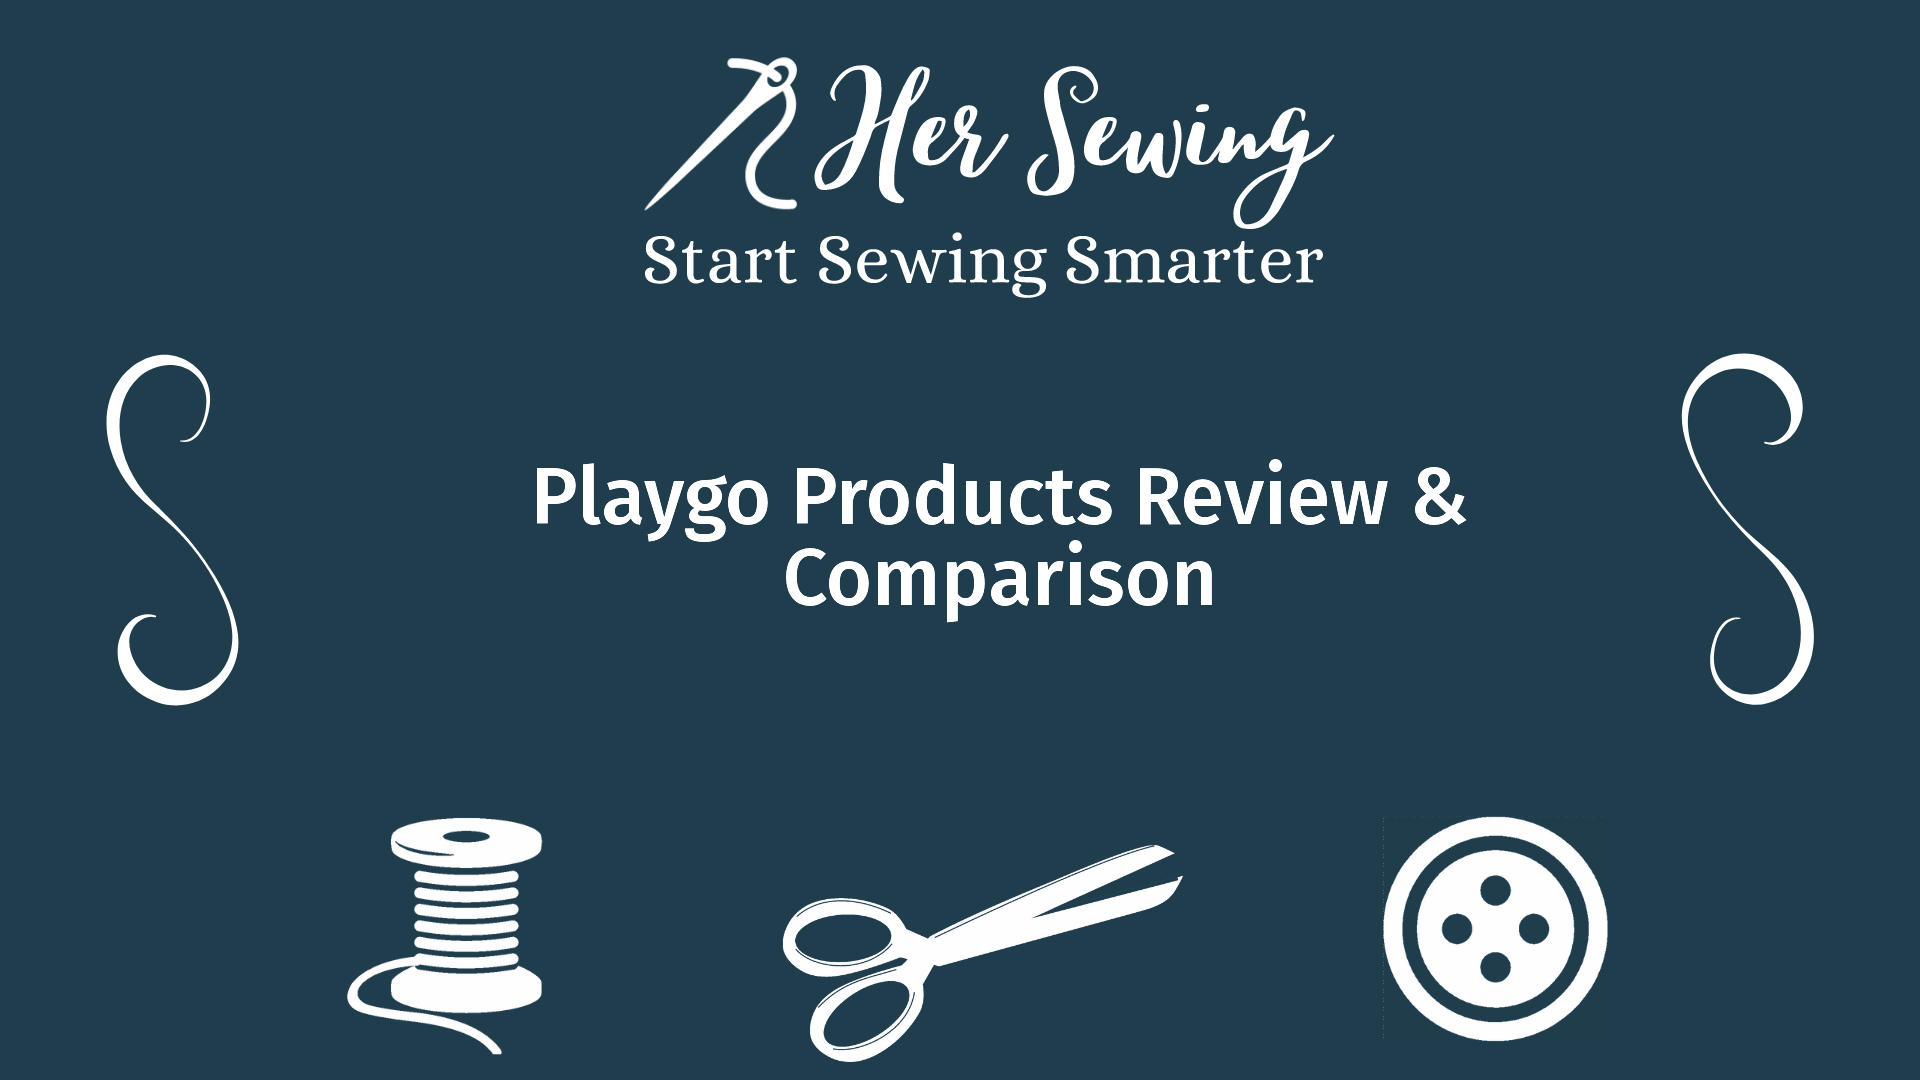 Playgo Products Review & Comparison